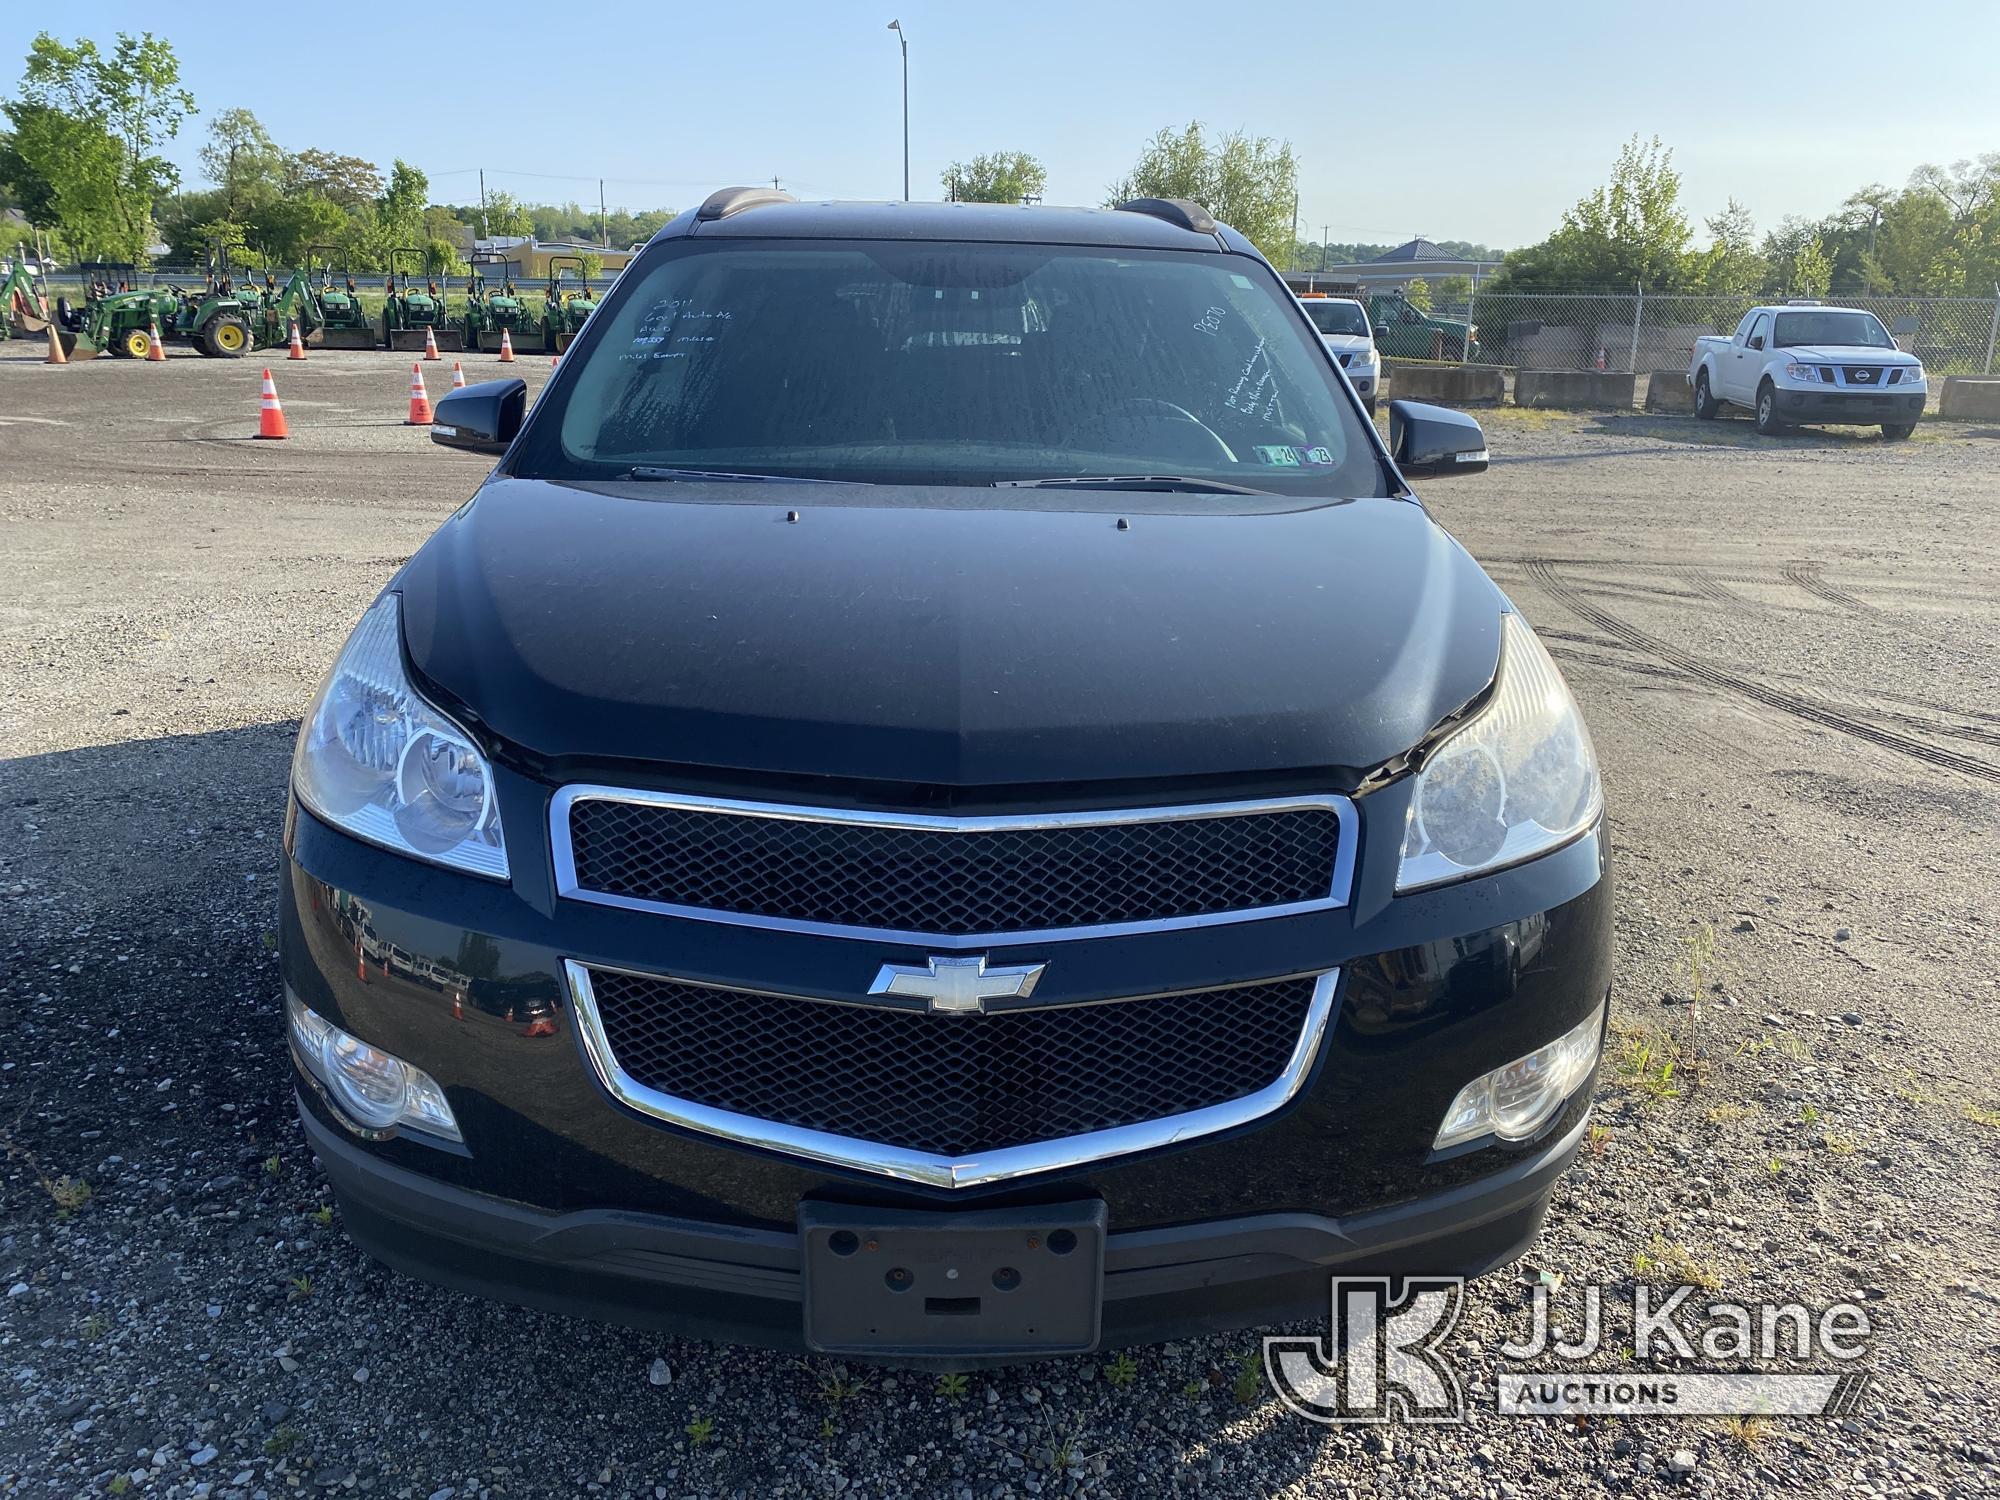 (Plymouth Meeting, PA) 2011 Chevrolet Traverse AWD 4-Door Sport Utility Vehicle Not Running Conditio